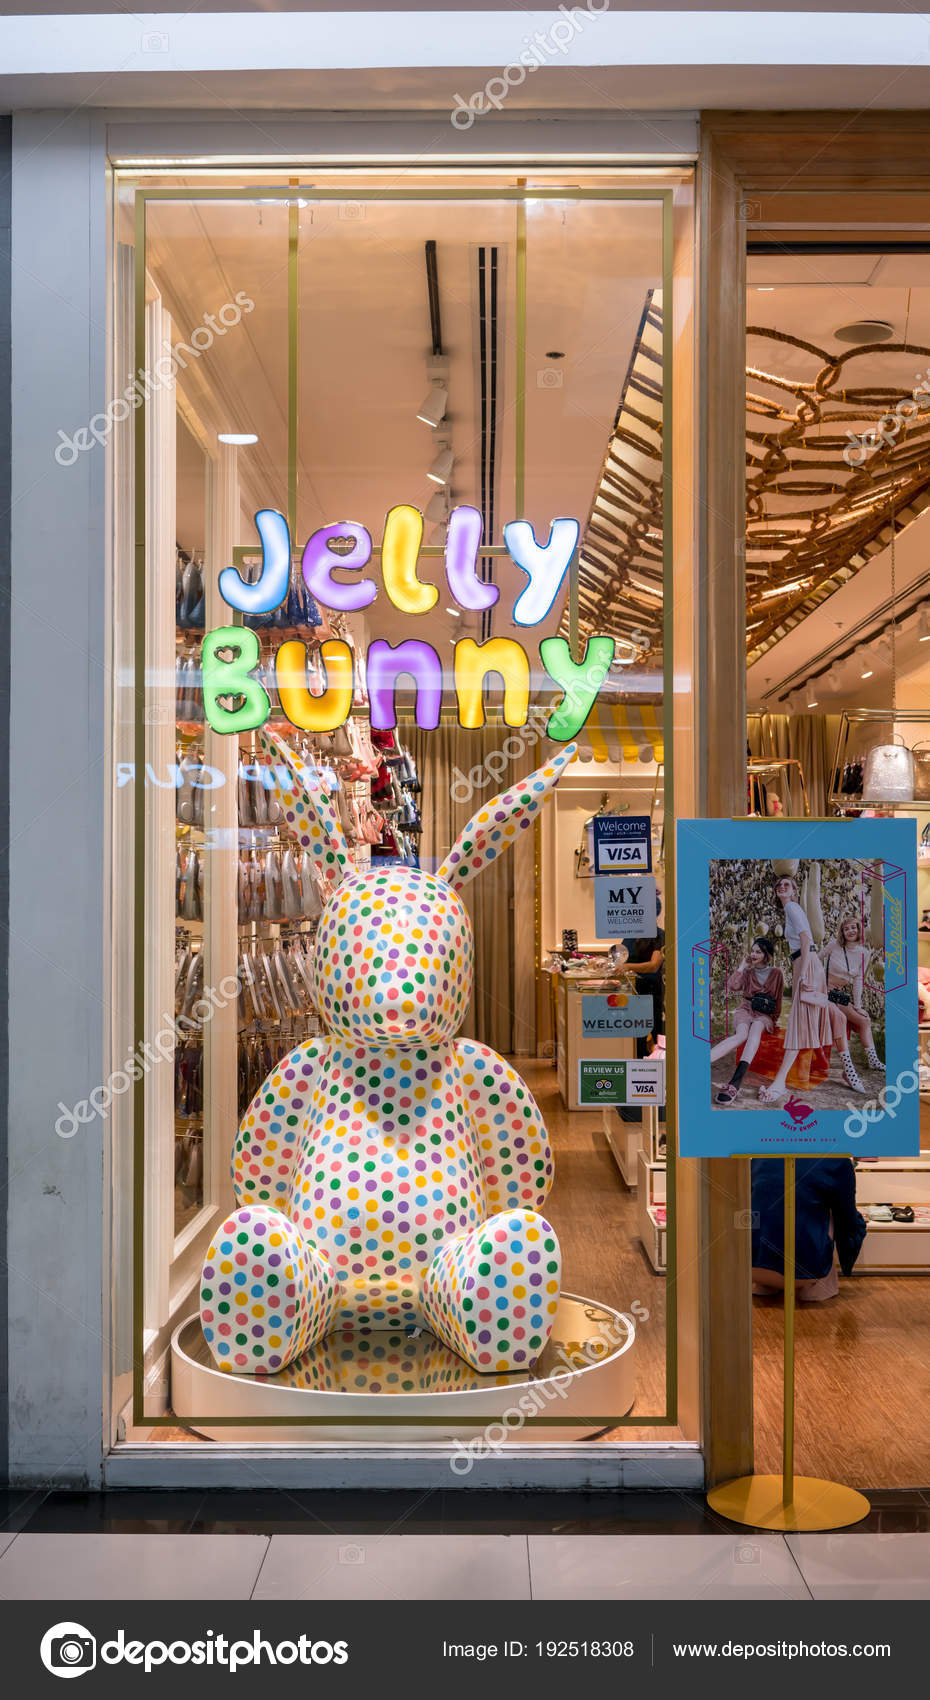 jelly bunny from which country